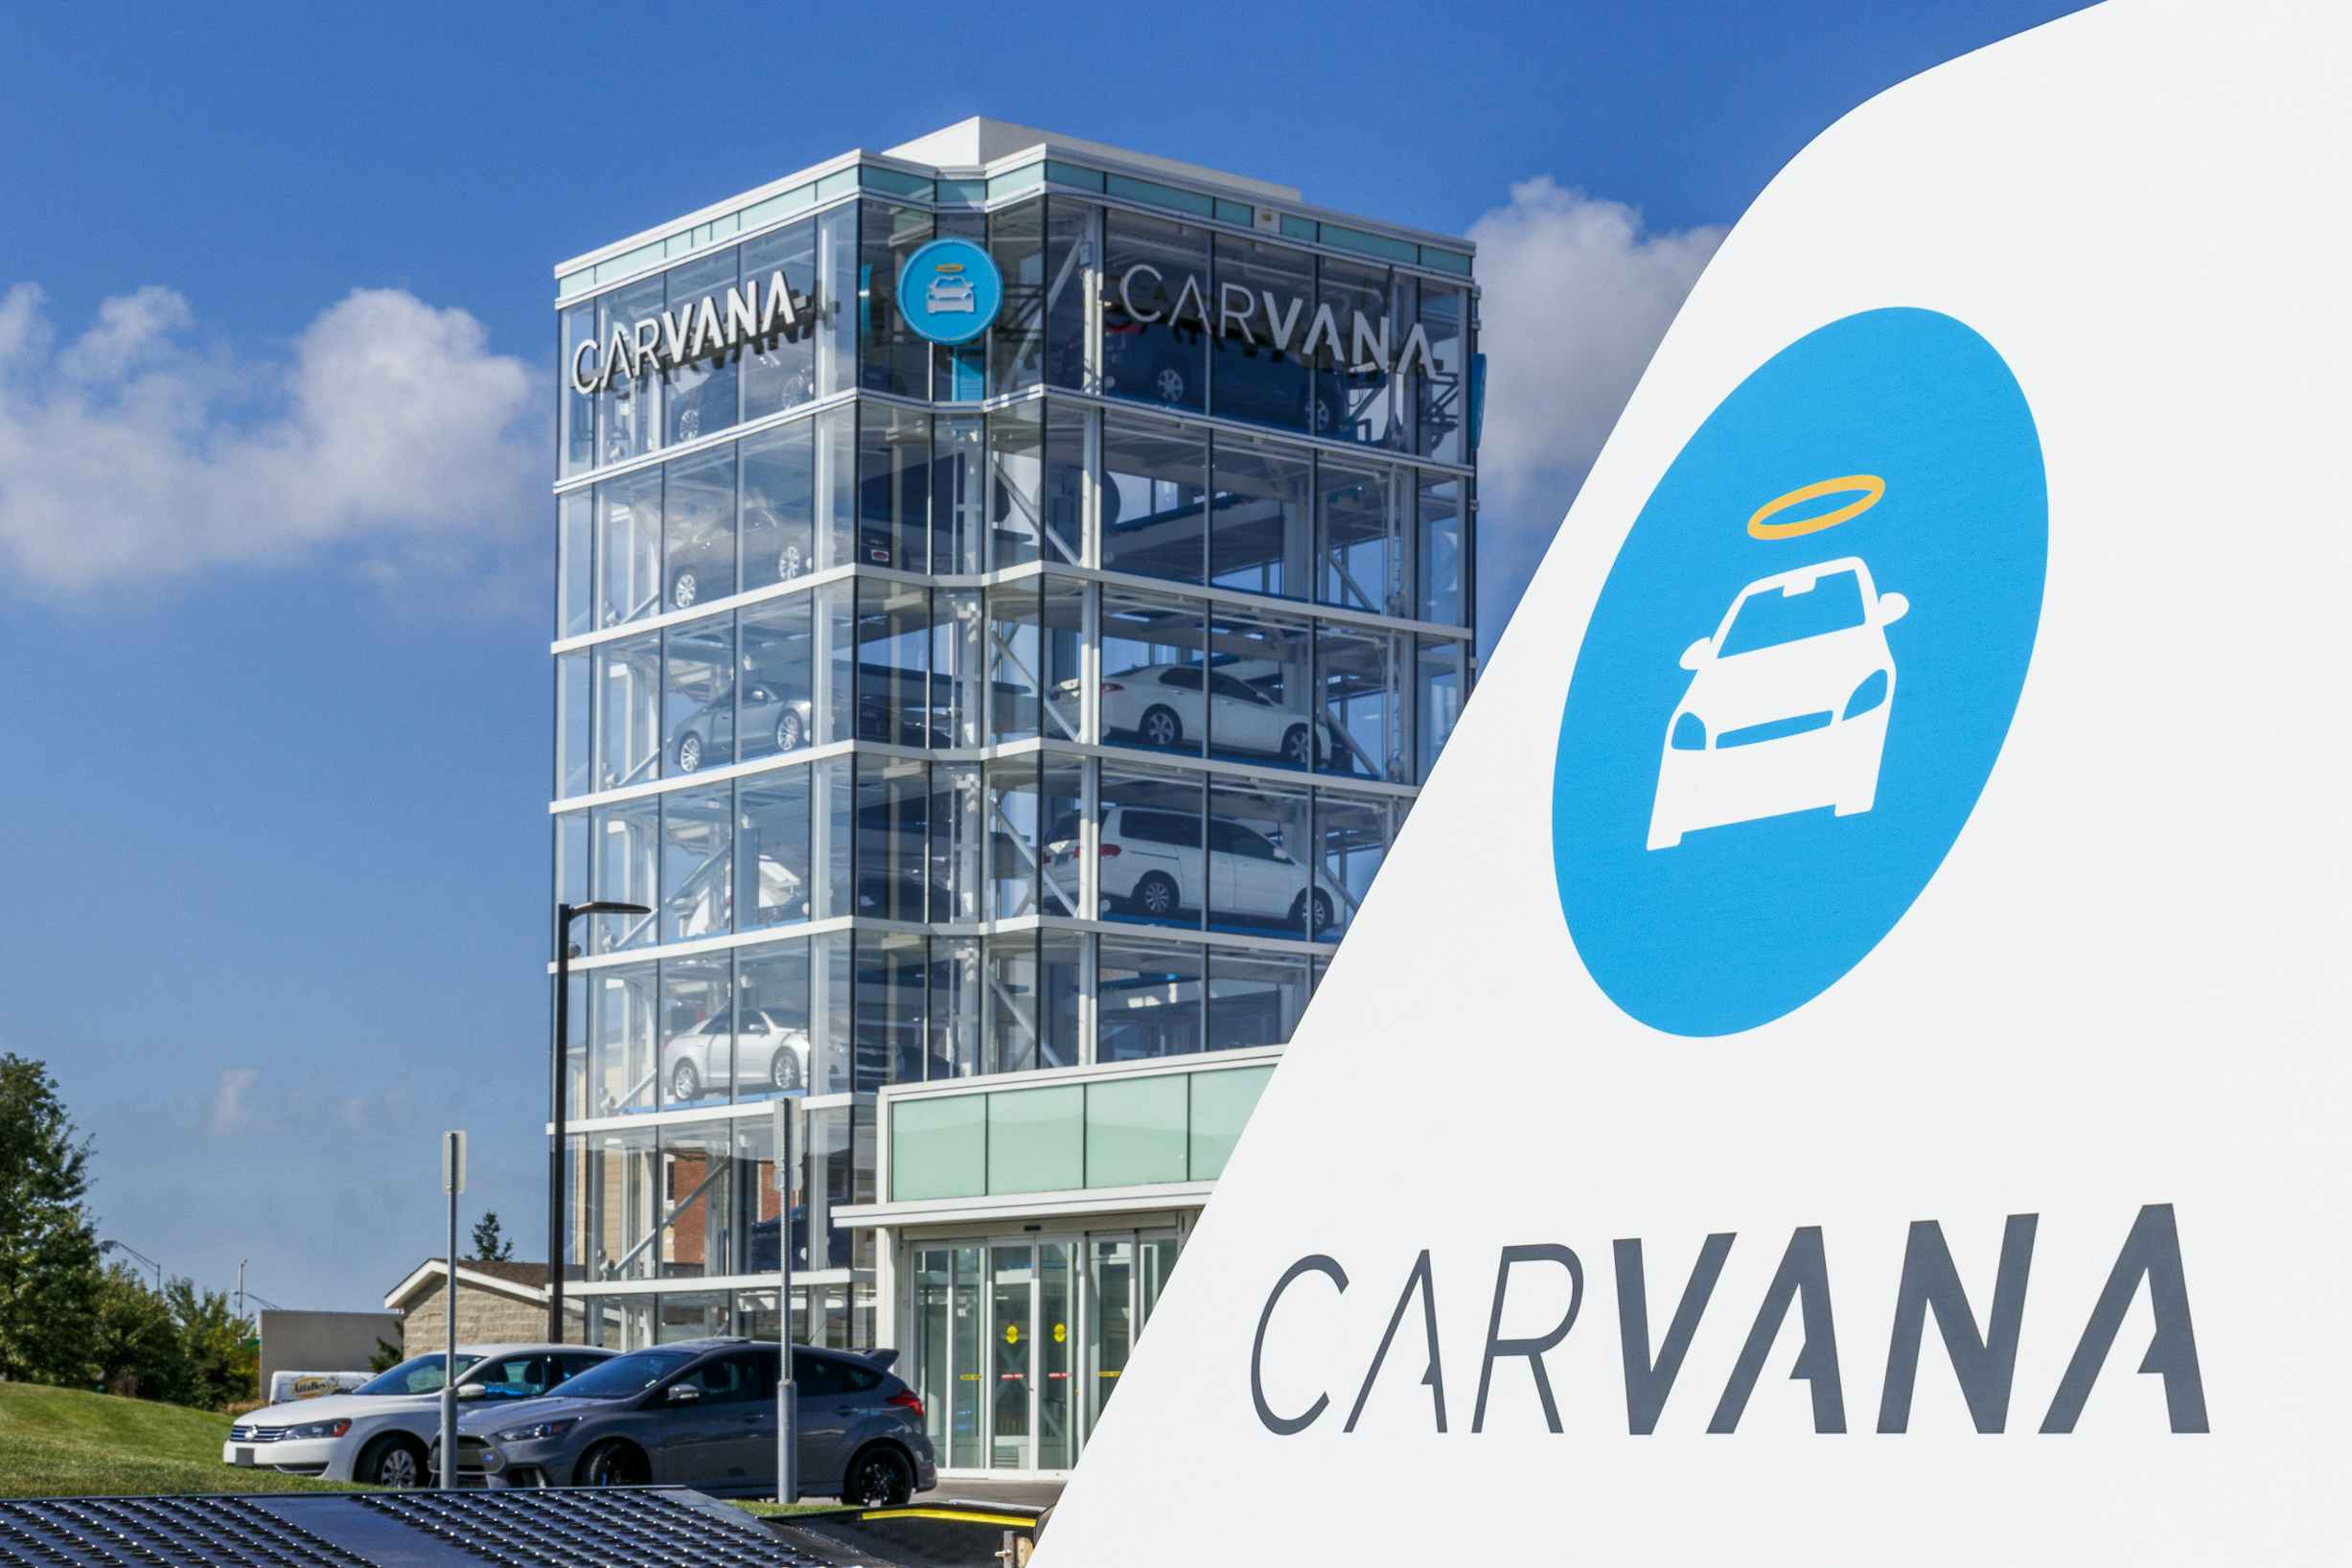 A Carvana sign with the Carvana building in the background with vehicles parked in front of it